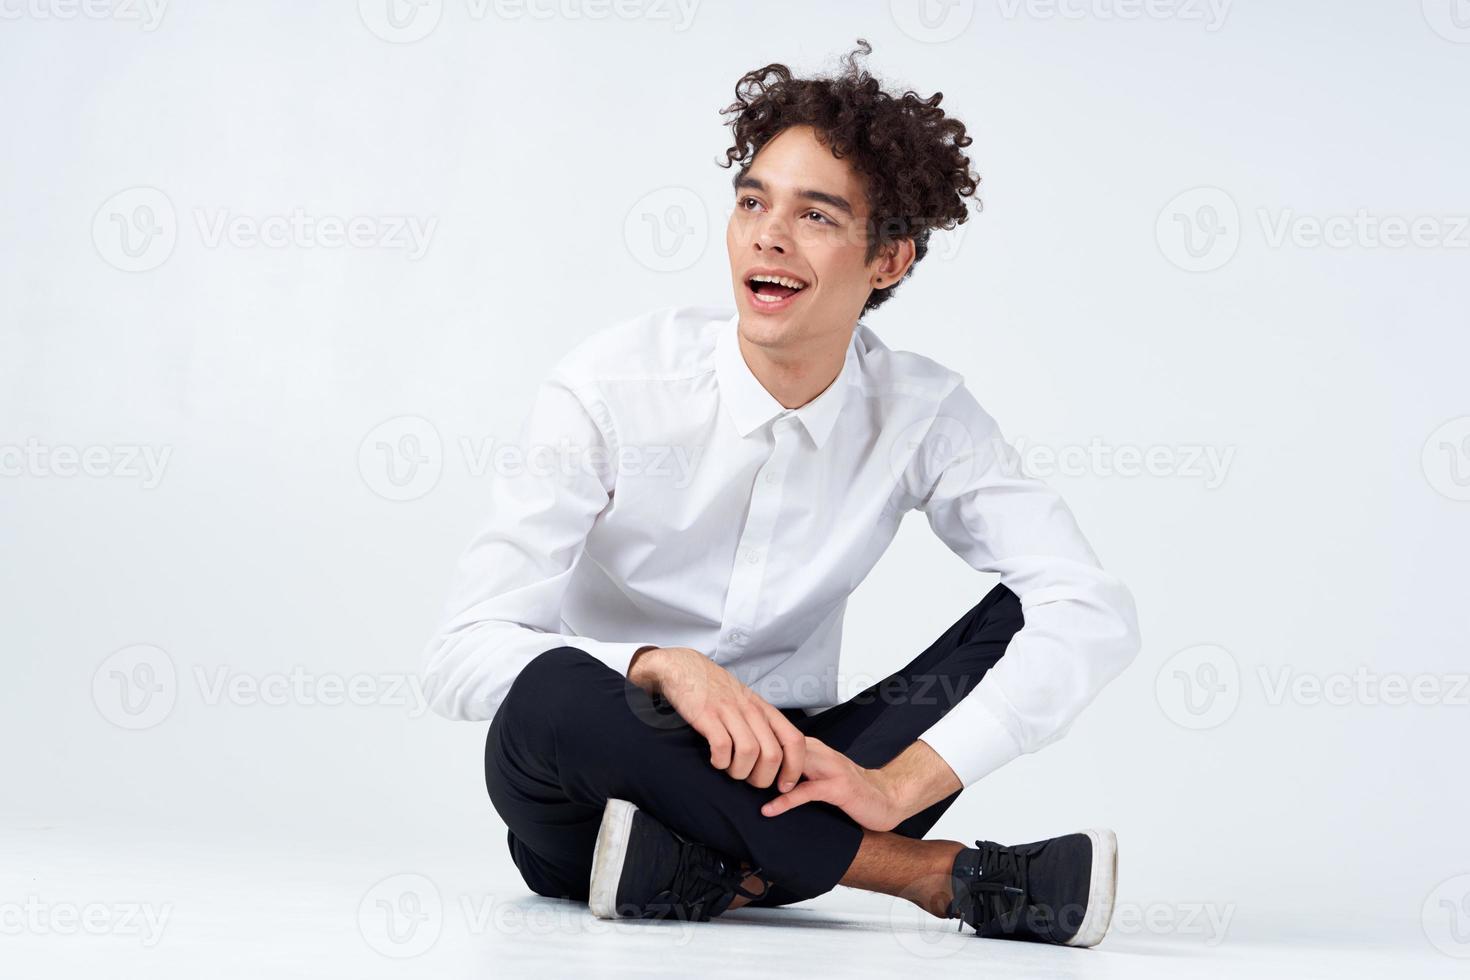 a guy in trousers in sneakers and a shirt sits on the floor and gestures with his hands photo